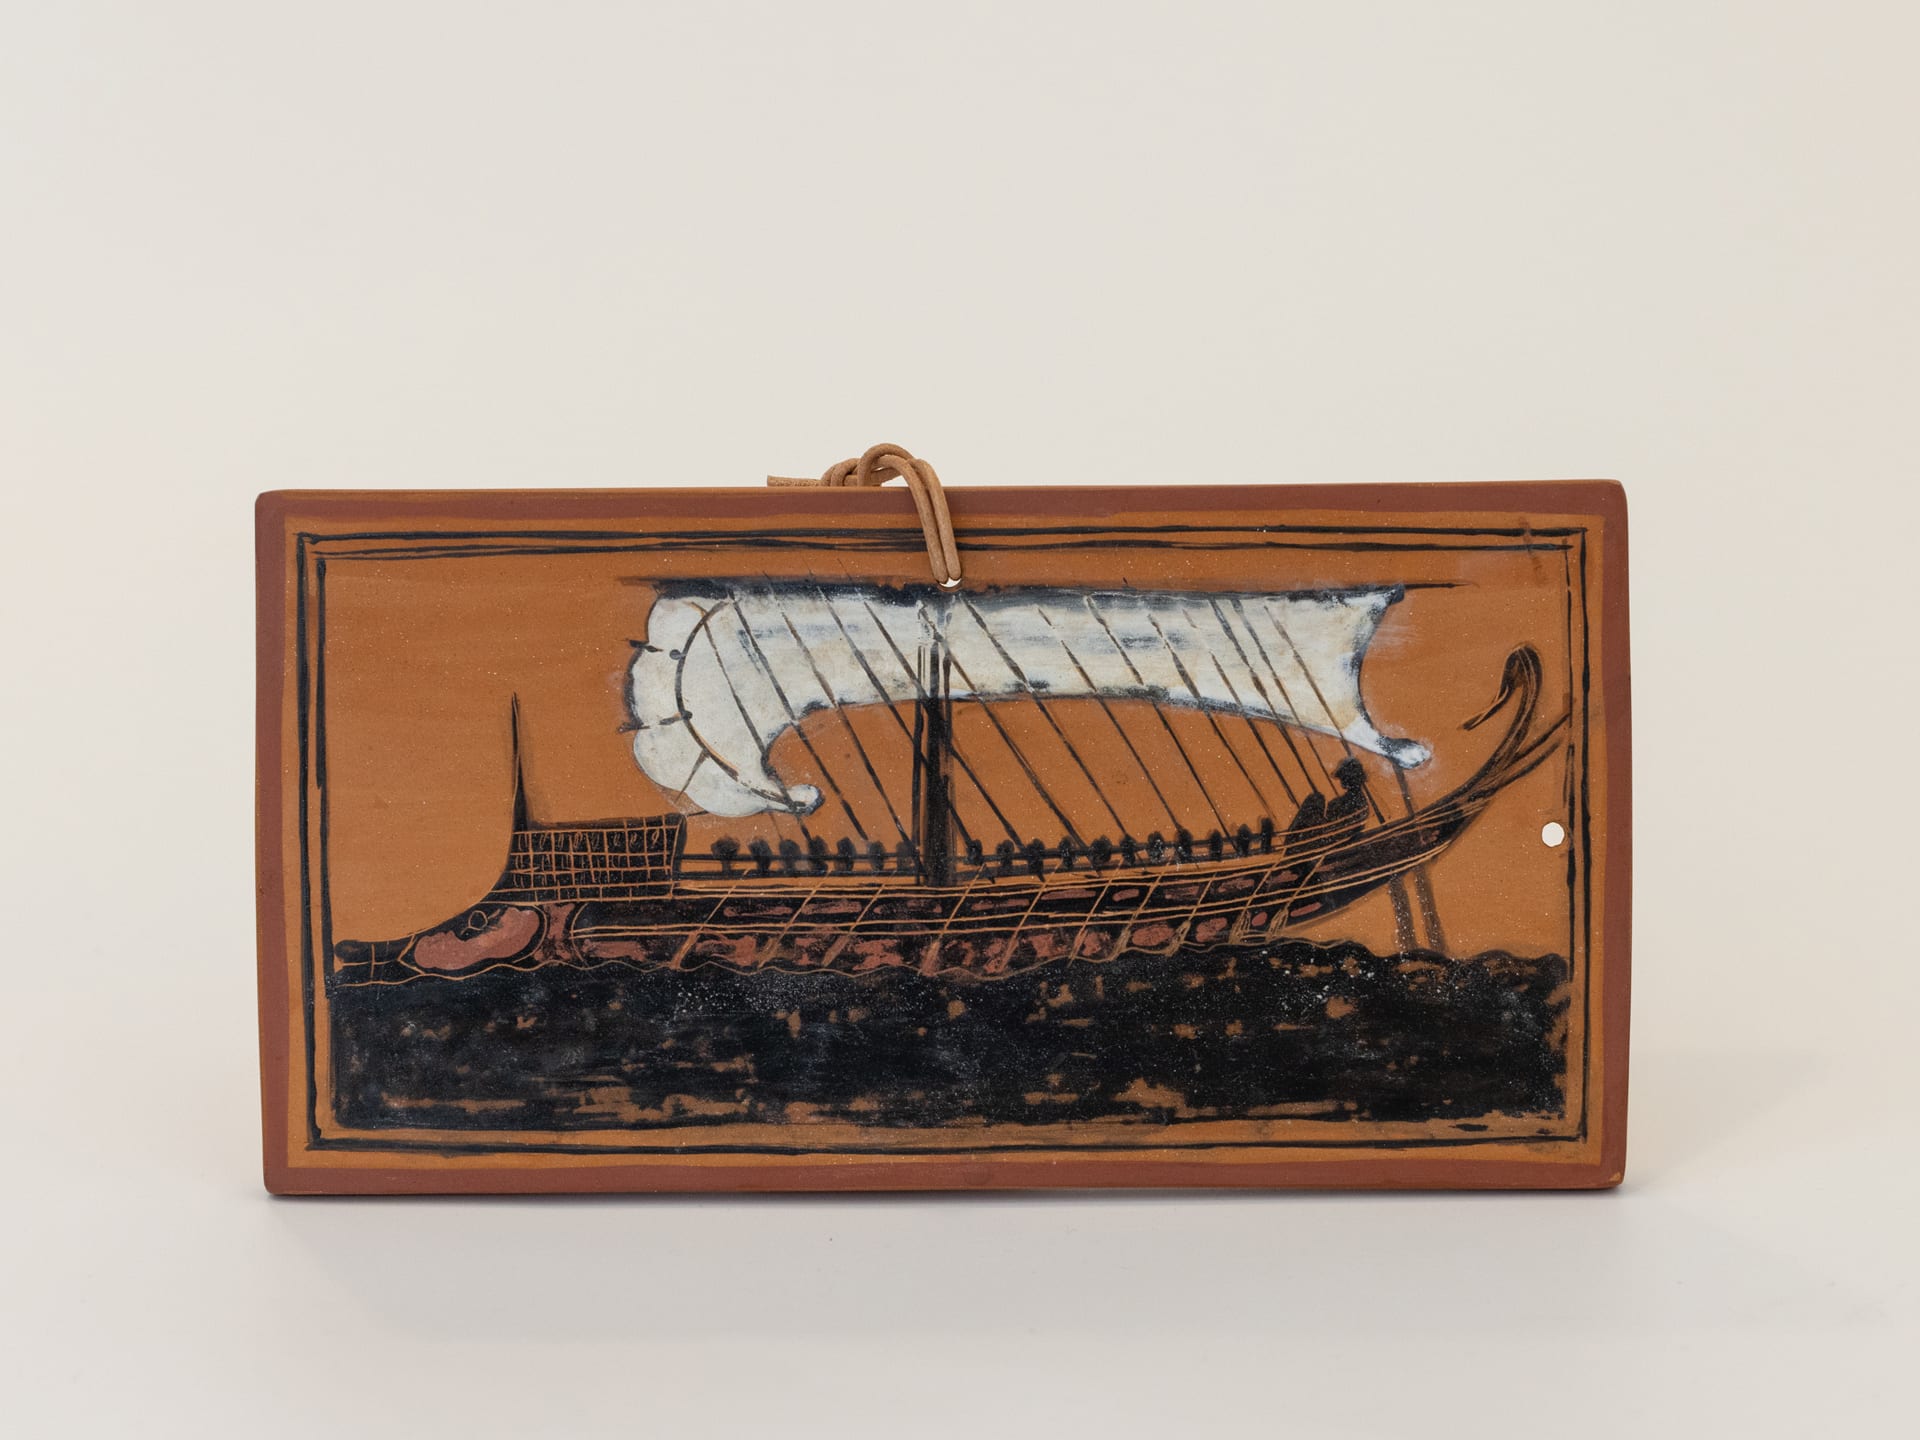 Ceramic Tile with a Depiction of a Ship